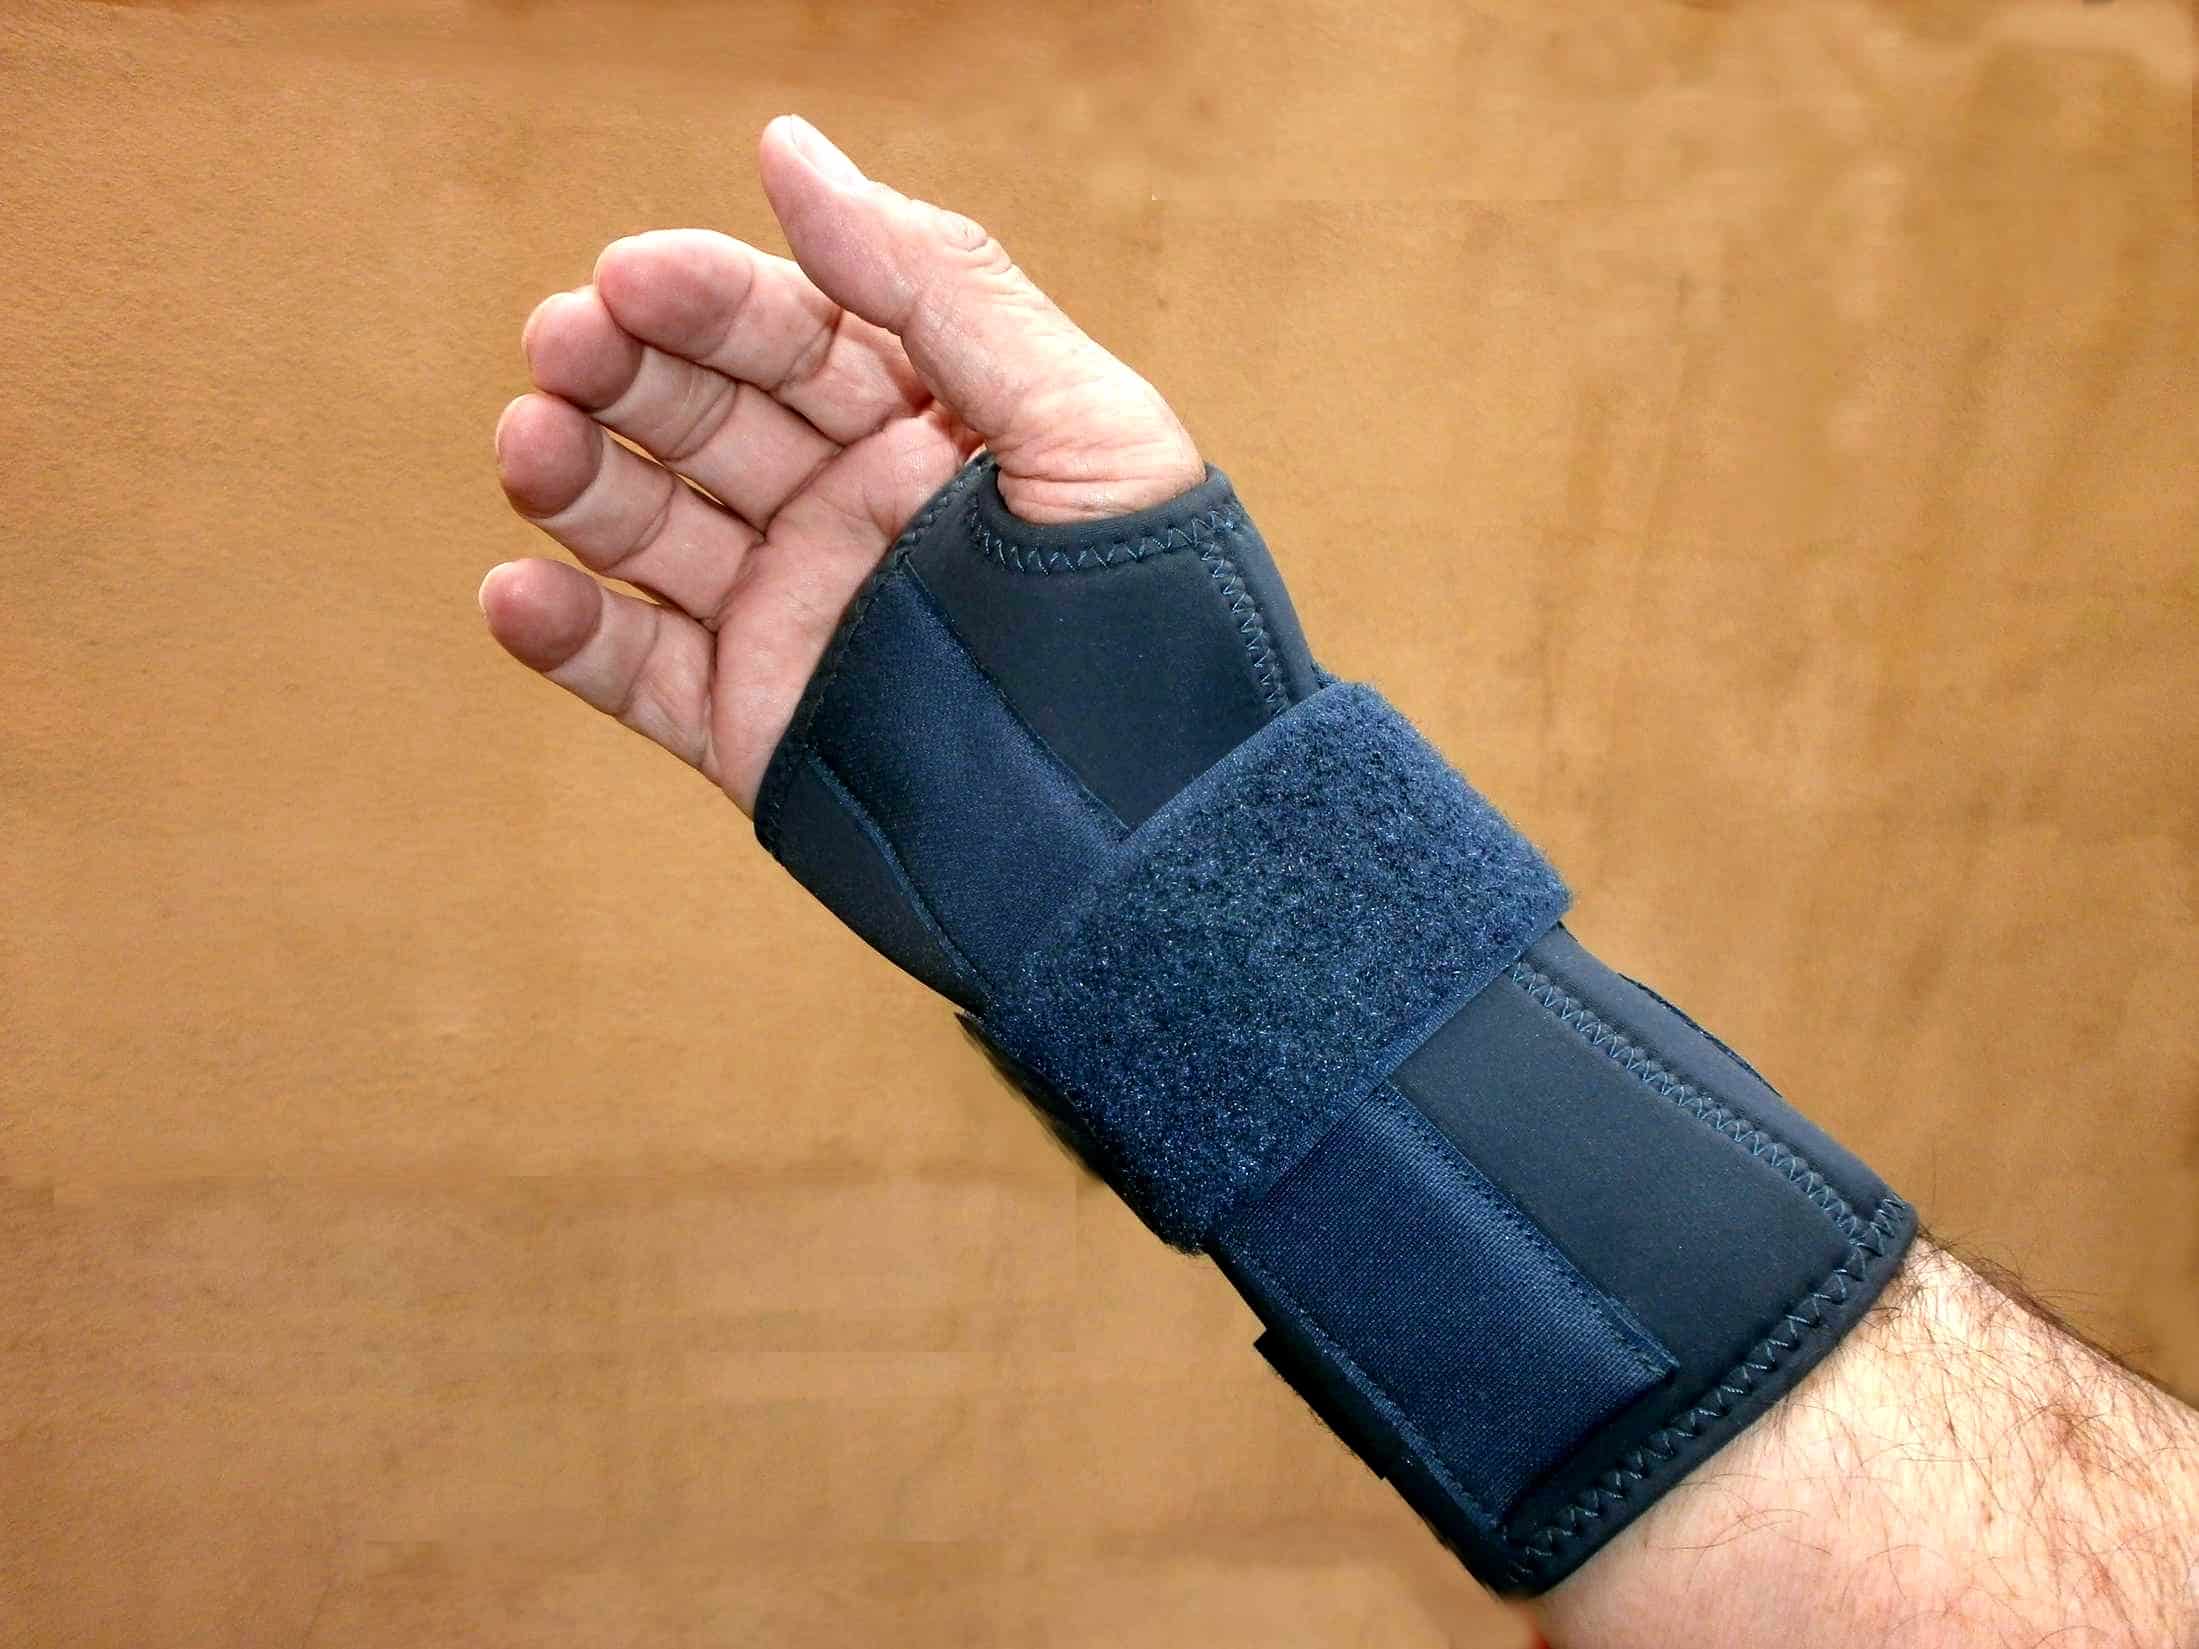 A hand with wrist and thumb support